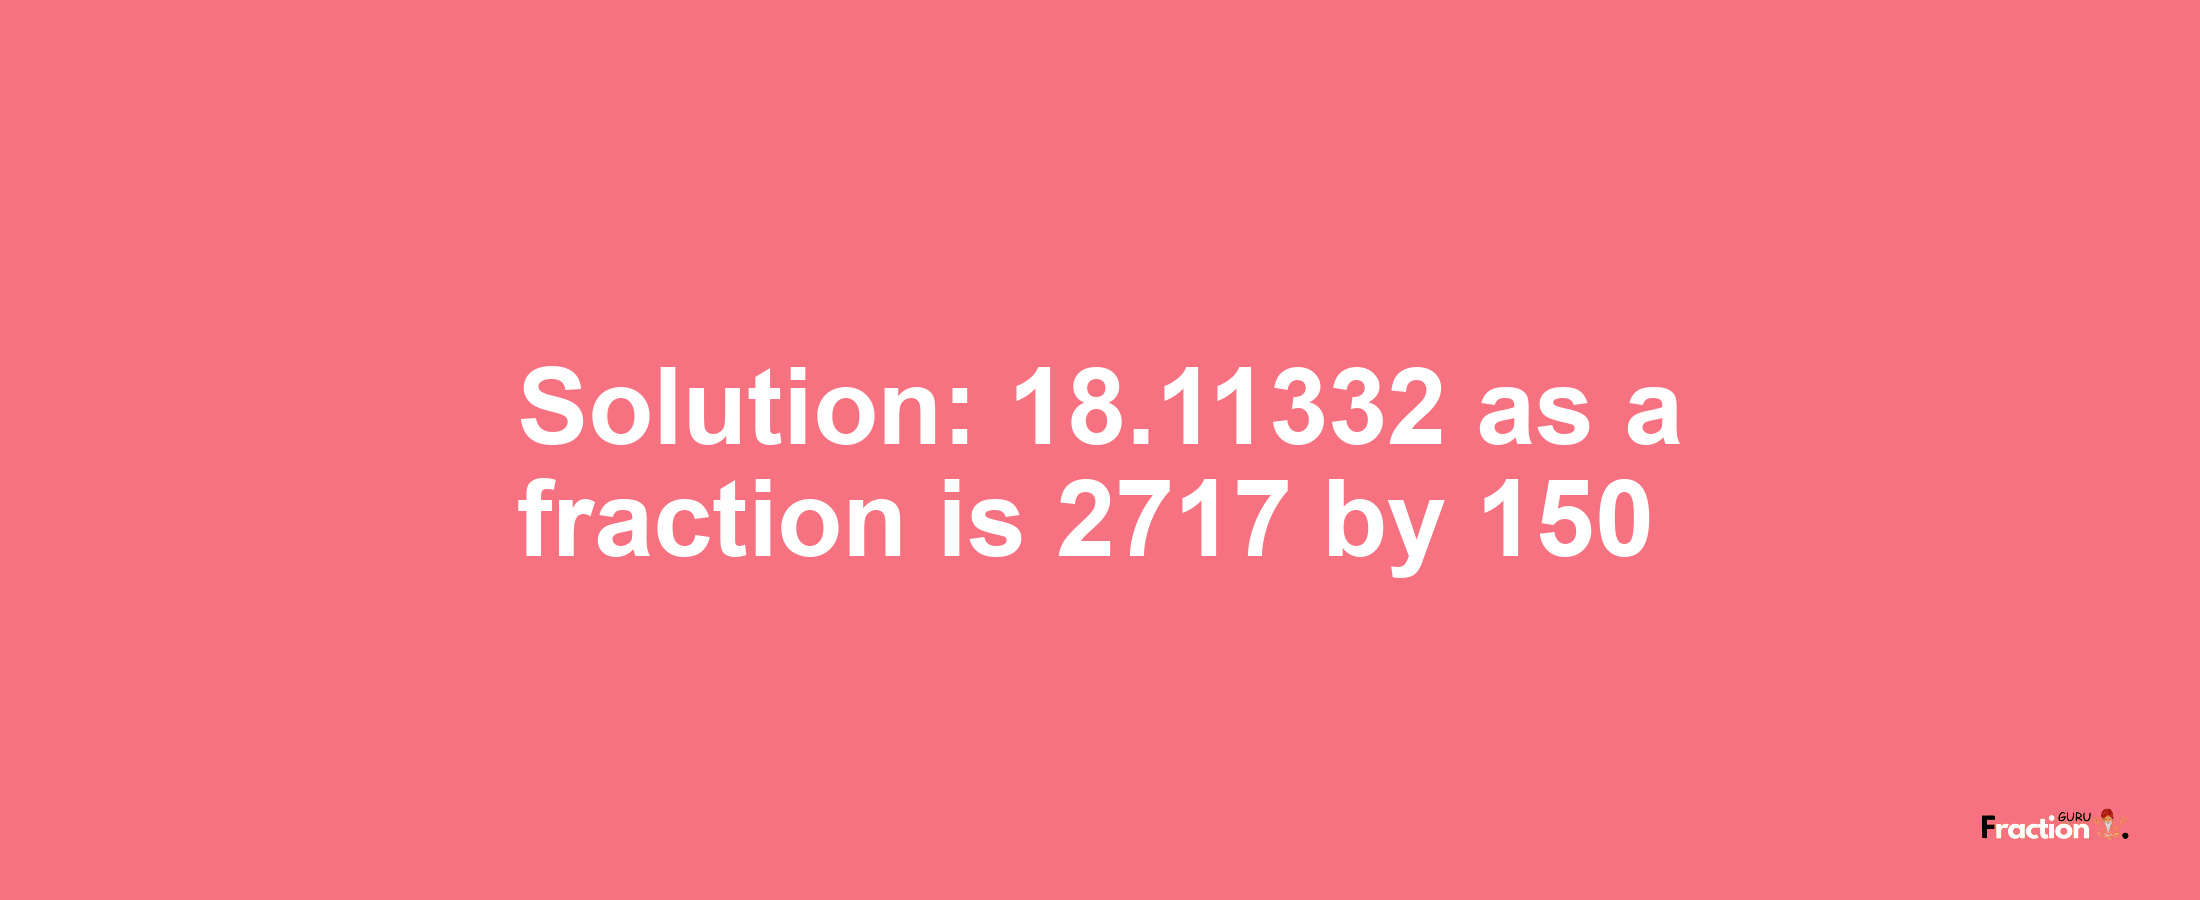 Solution:18.11332 as a fraction is 2717/150